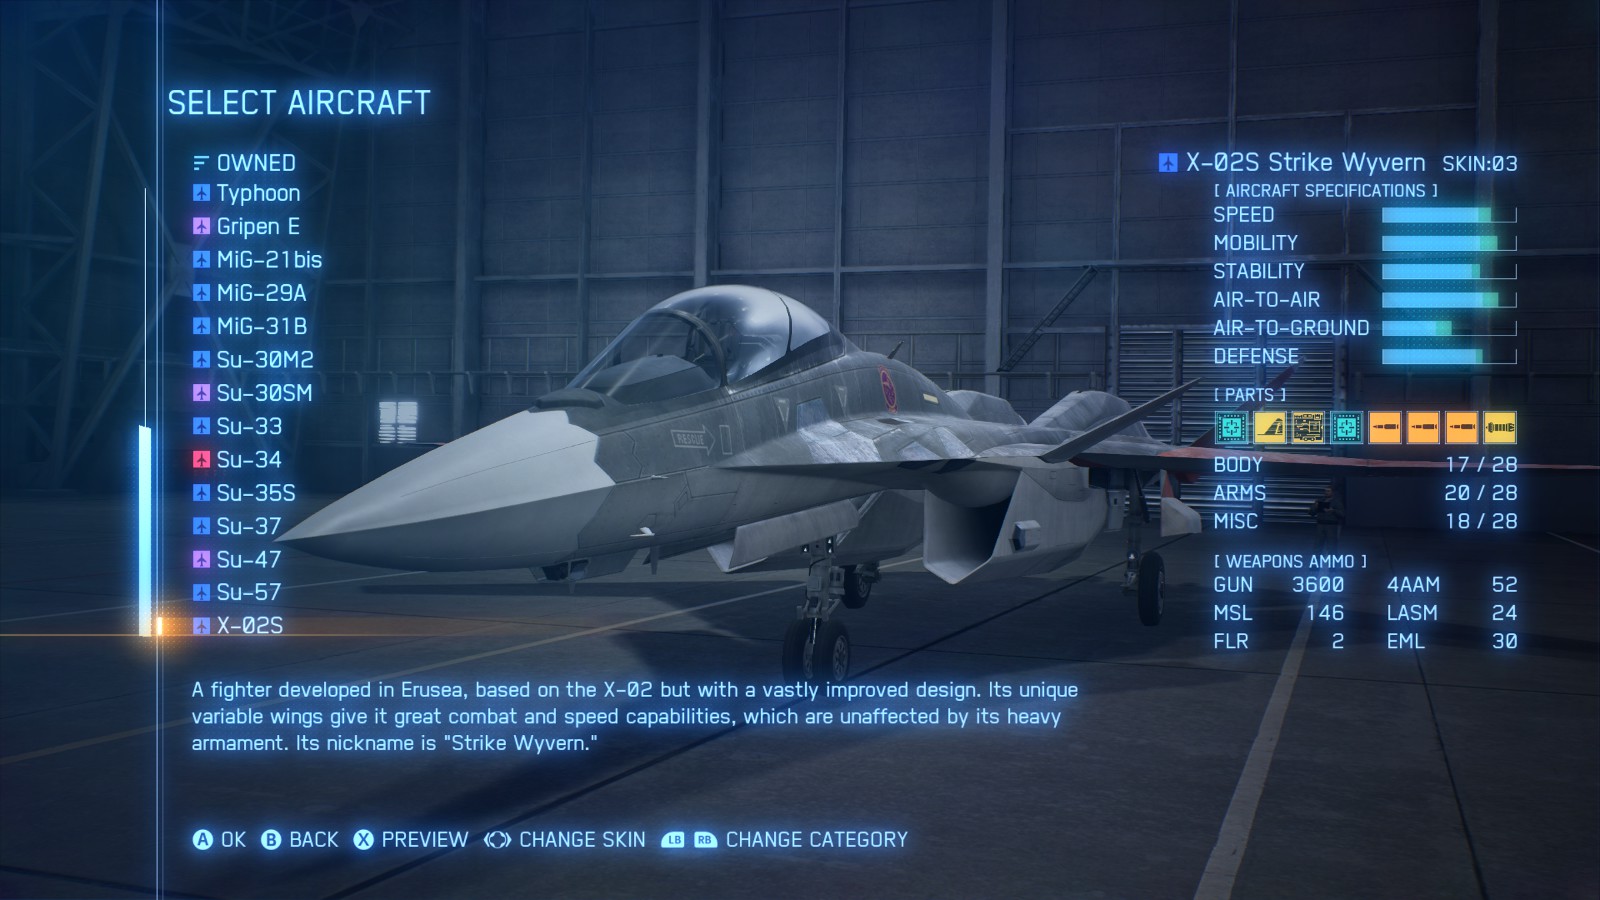 Ace Combat 7' Guide: How Many Campaign Missions, How to Change Skins, Best  Planes